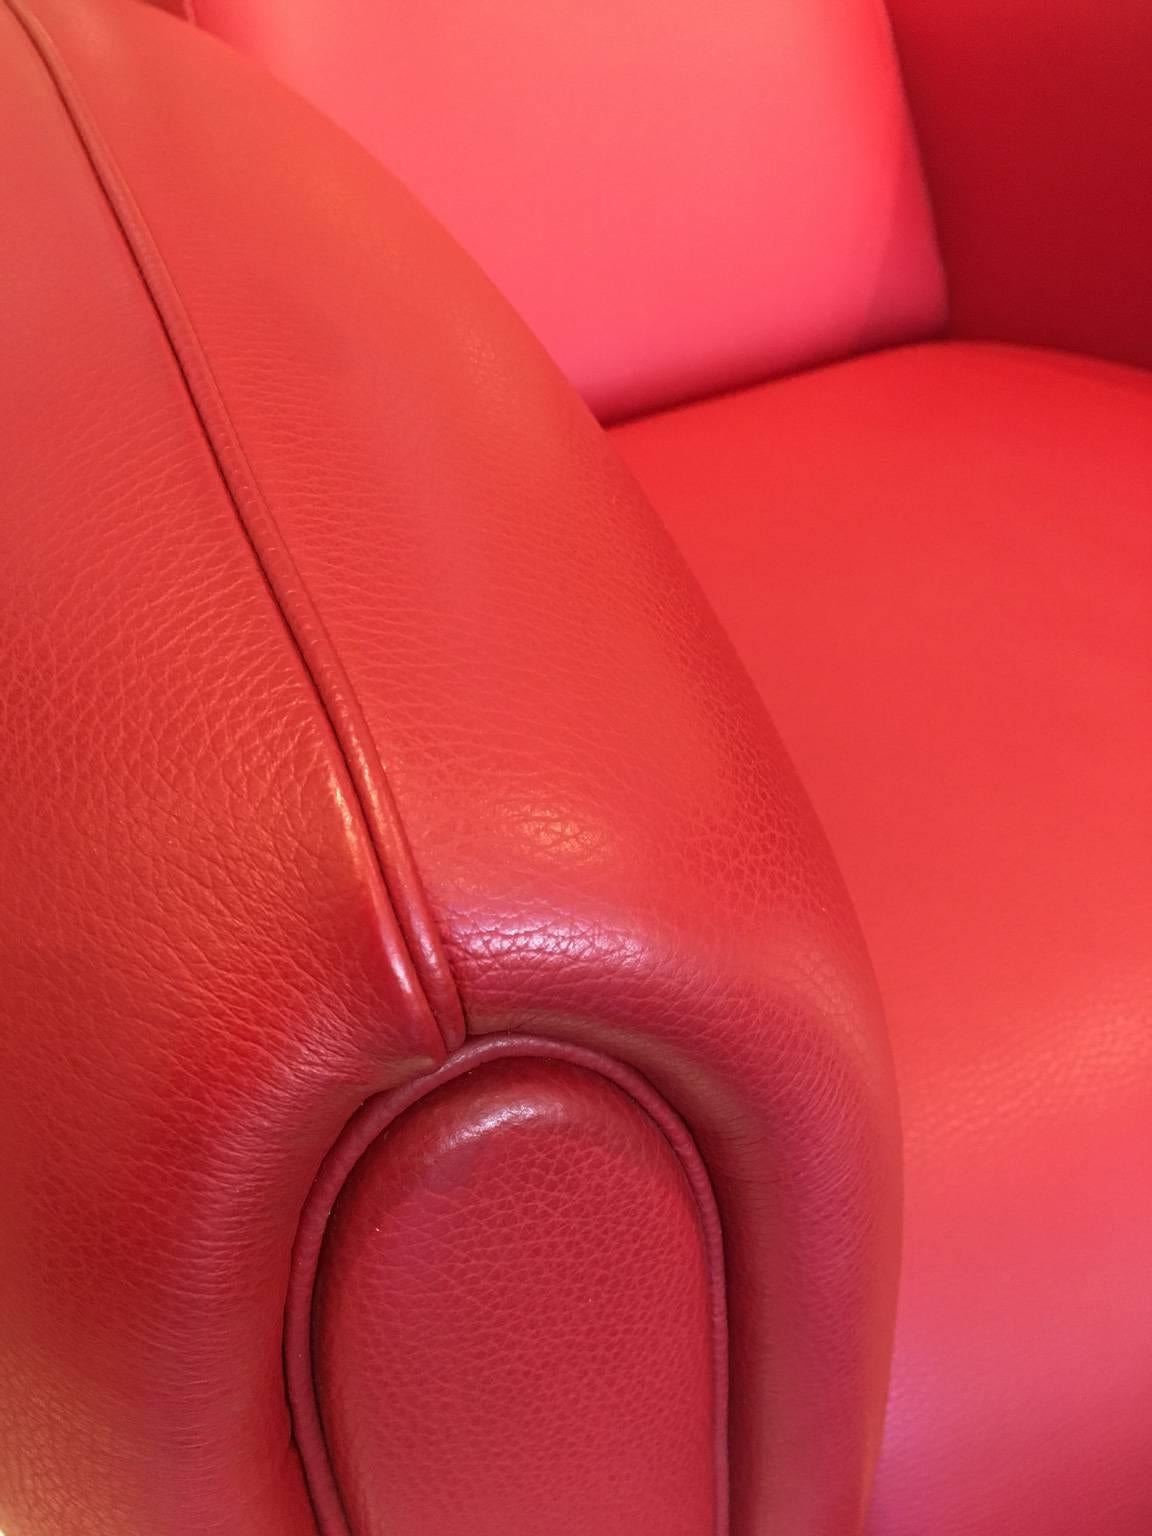 Modern Red Leather DS-57 Bugatti Lounge Chair by De Sede